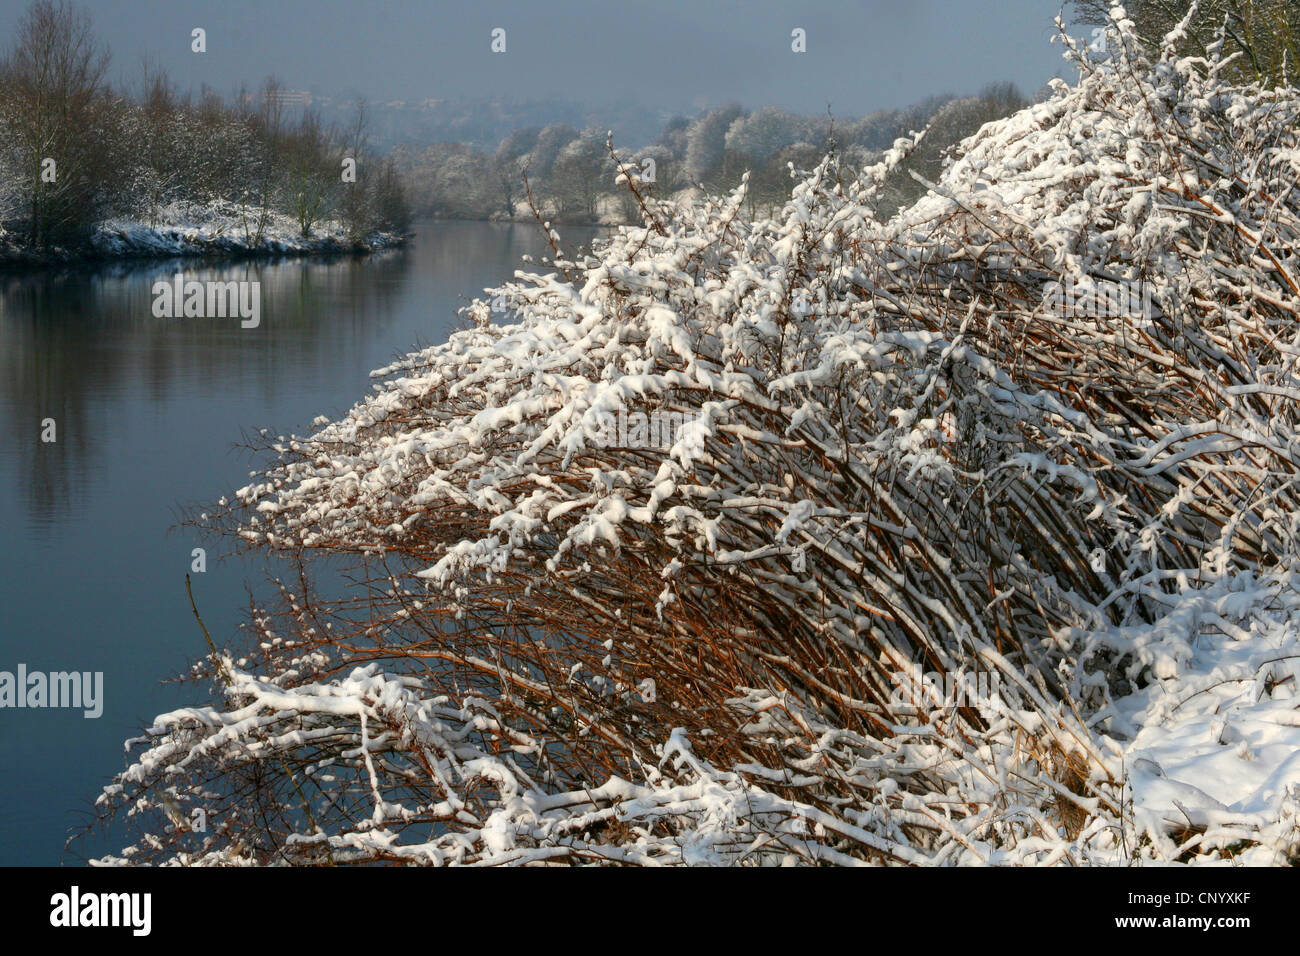 Japanese Knotweed (Fallopia japonica, Reynoutria japonica), snow on the dead sprouts at Ruhr river in winter, Germany, North Rhine-Westphalia, Ruhr Area, Essen Stock Photo